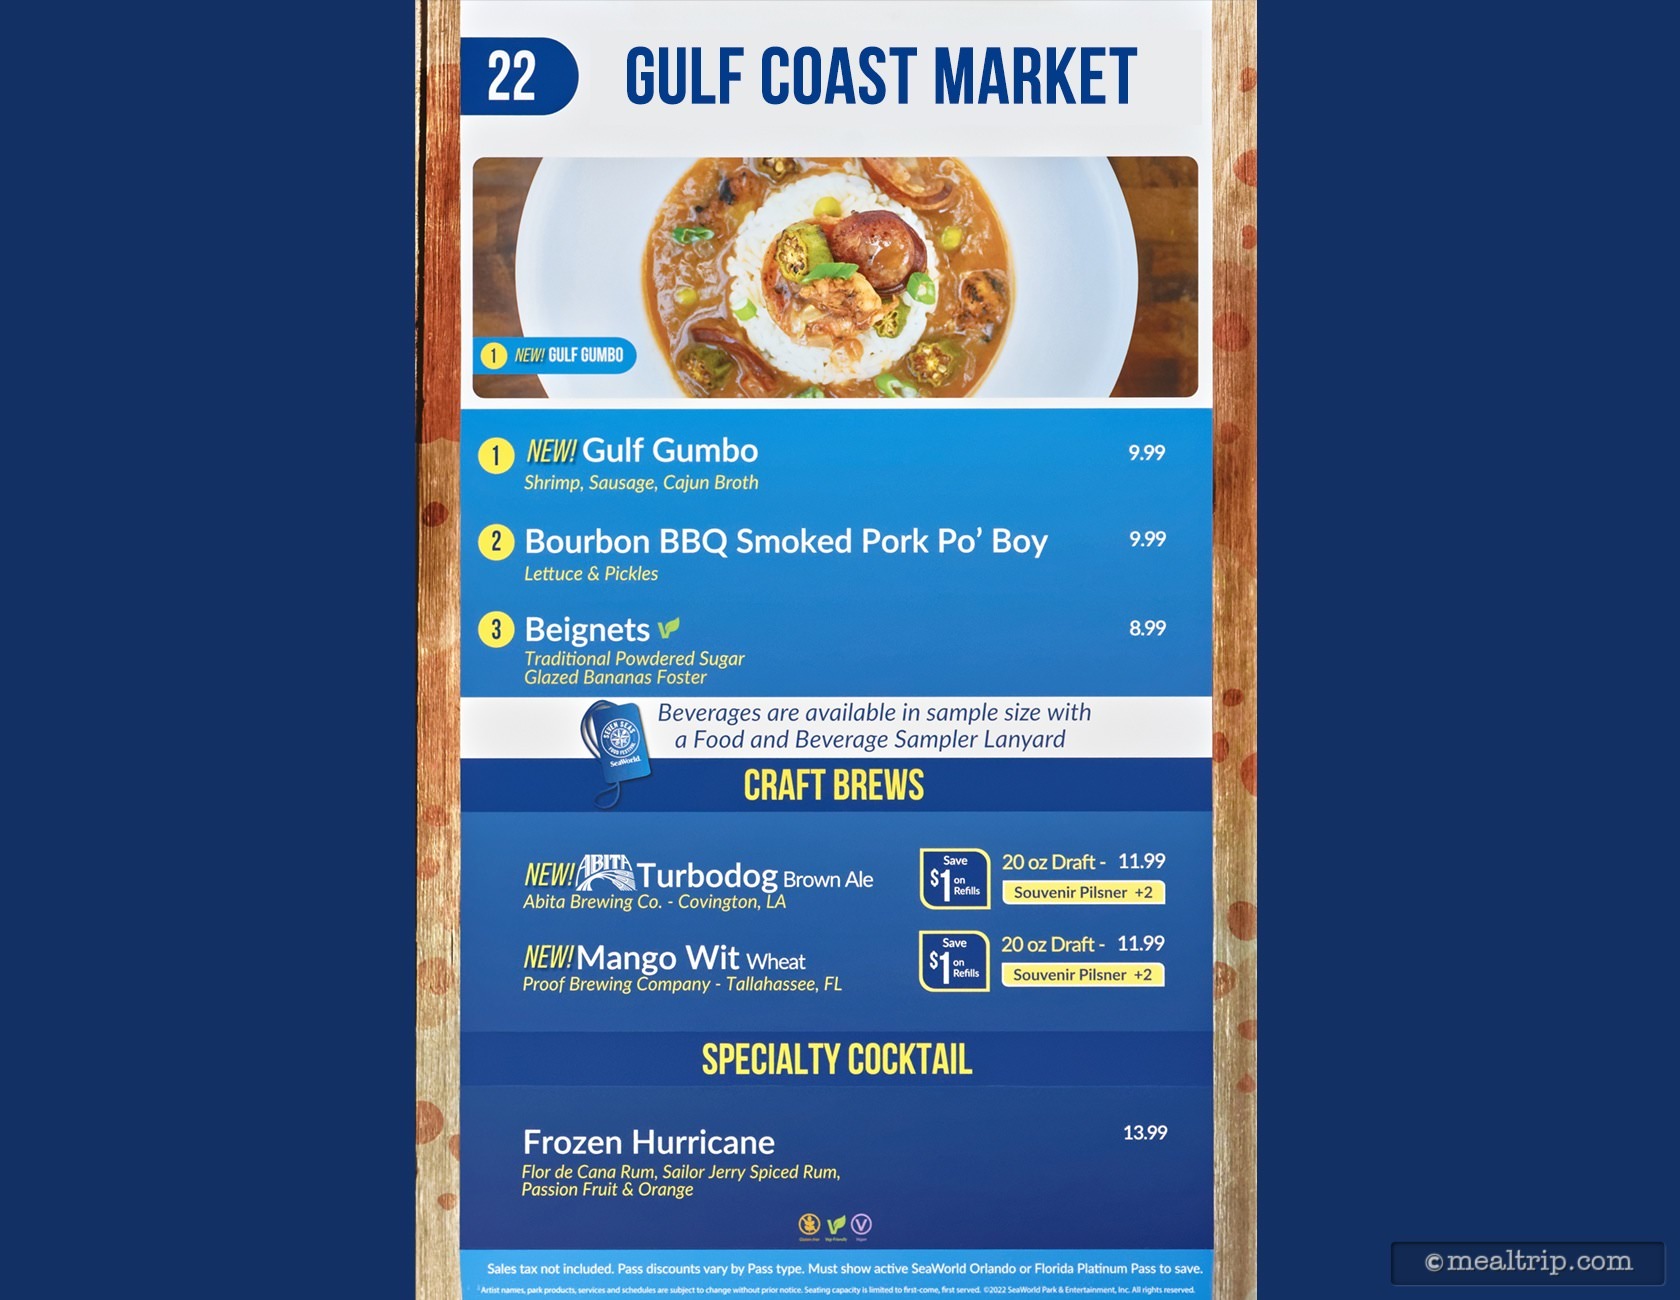 The Gulf Coast Market Menu Boards with Prices